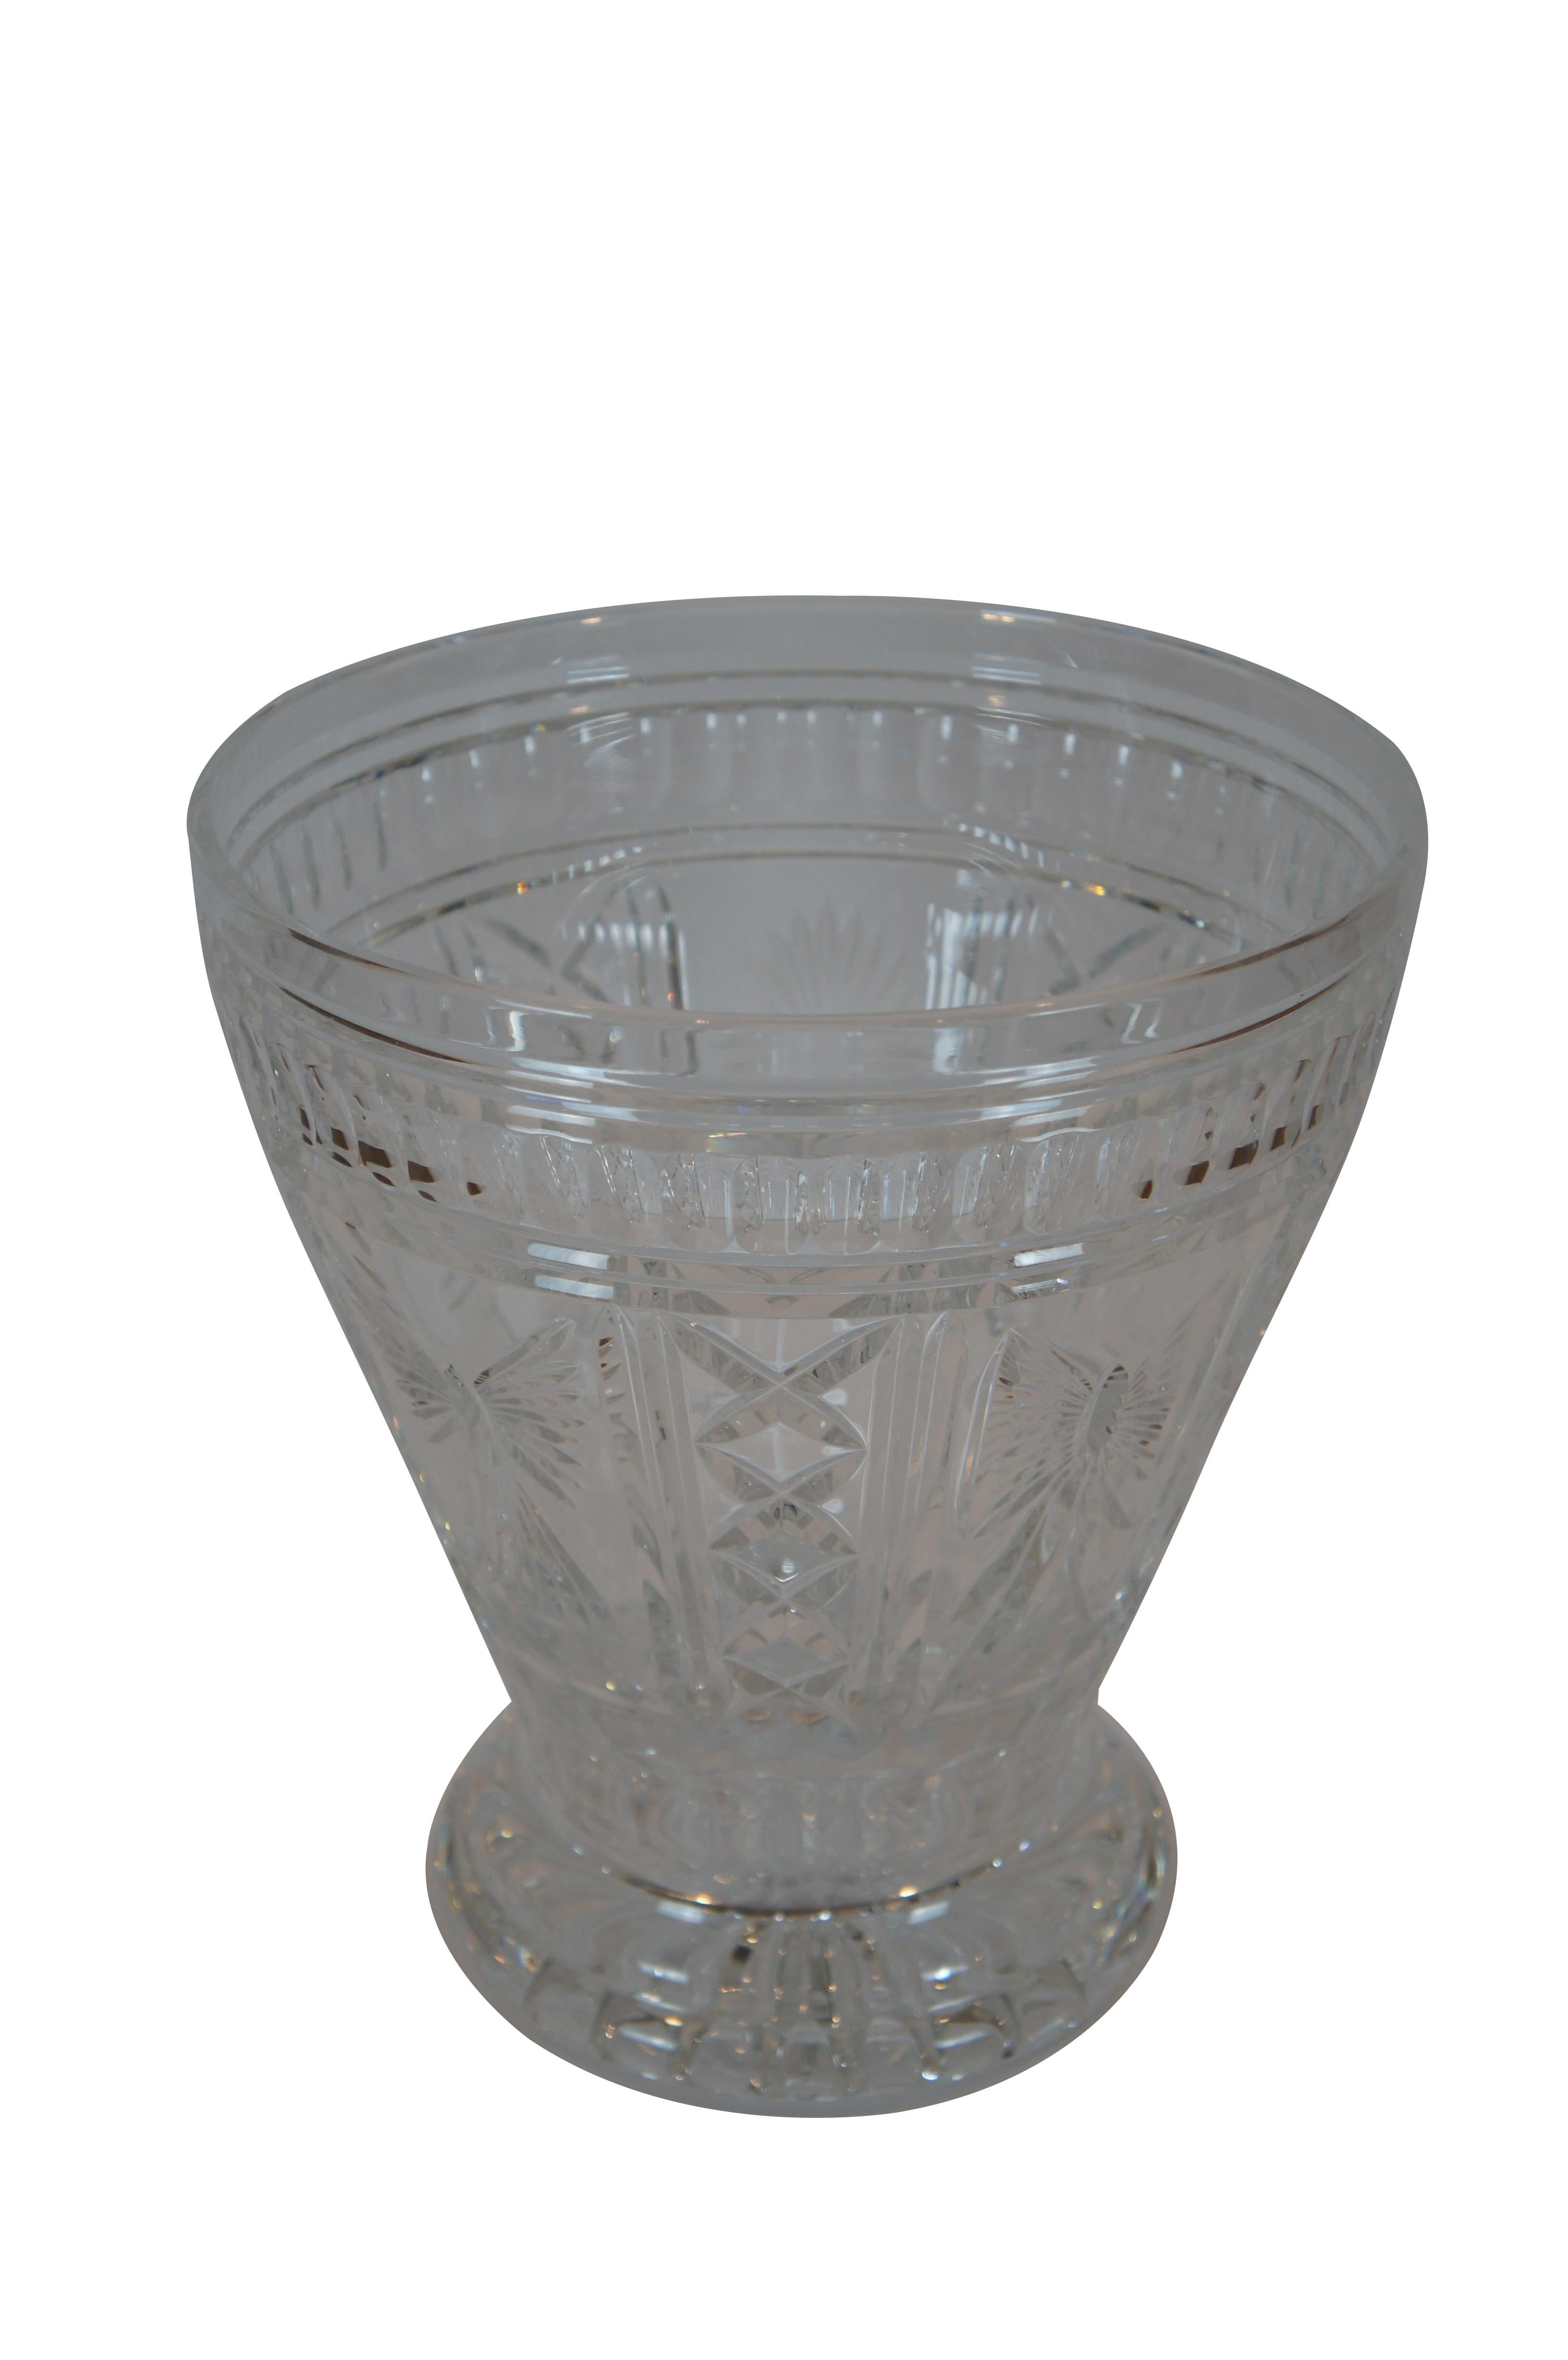 Vintage heavy Waterford Crystal Millennium champagne / wine / ice bucket.  Barware. Ireland.  Features all five of the toasting symbols: Happiness, Health, Love, Peace, Prosperity.  

Dimensions:
9.75” x 10.5” (Diameter x Height)